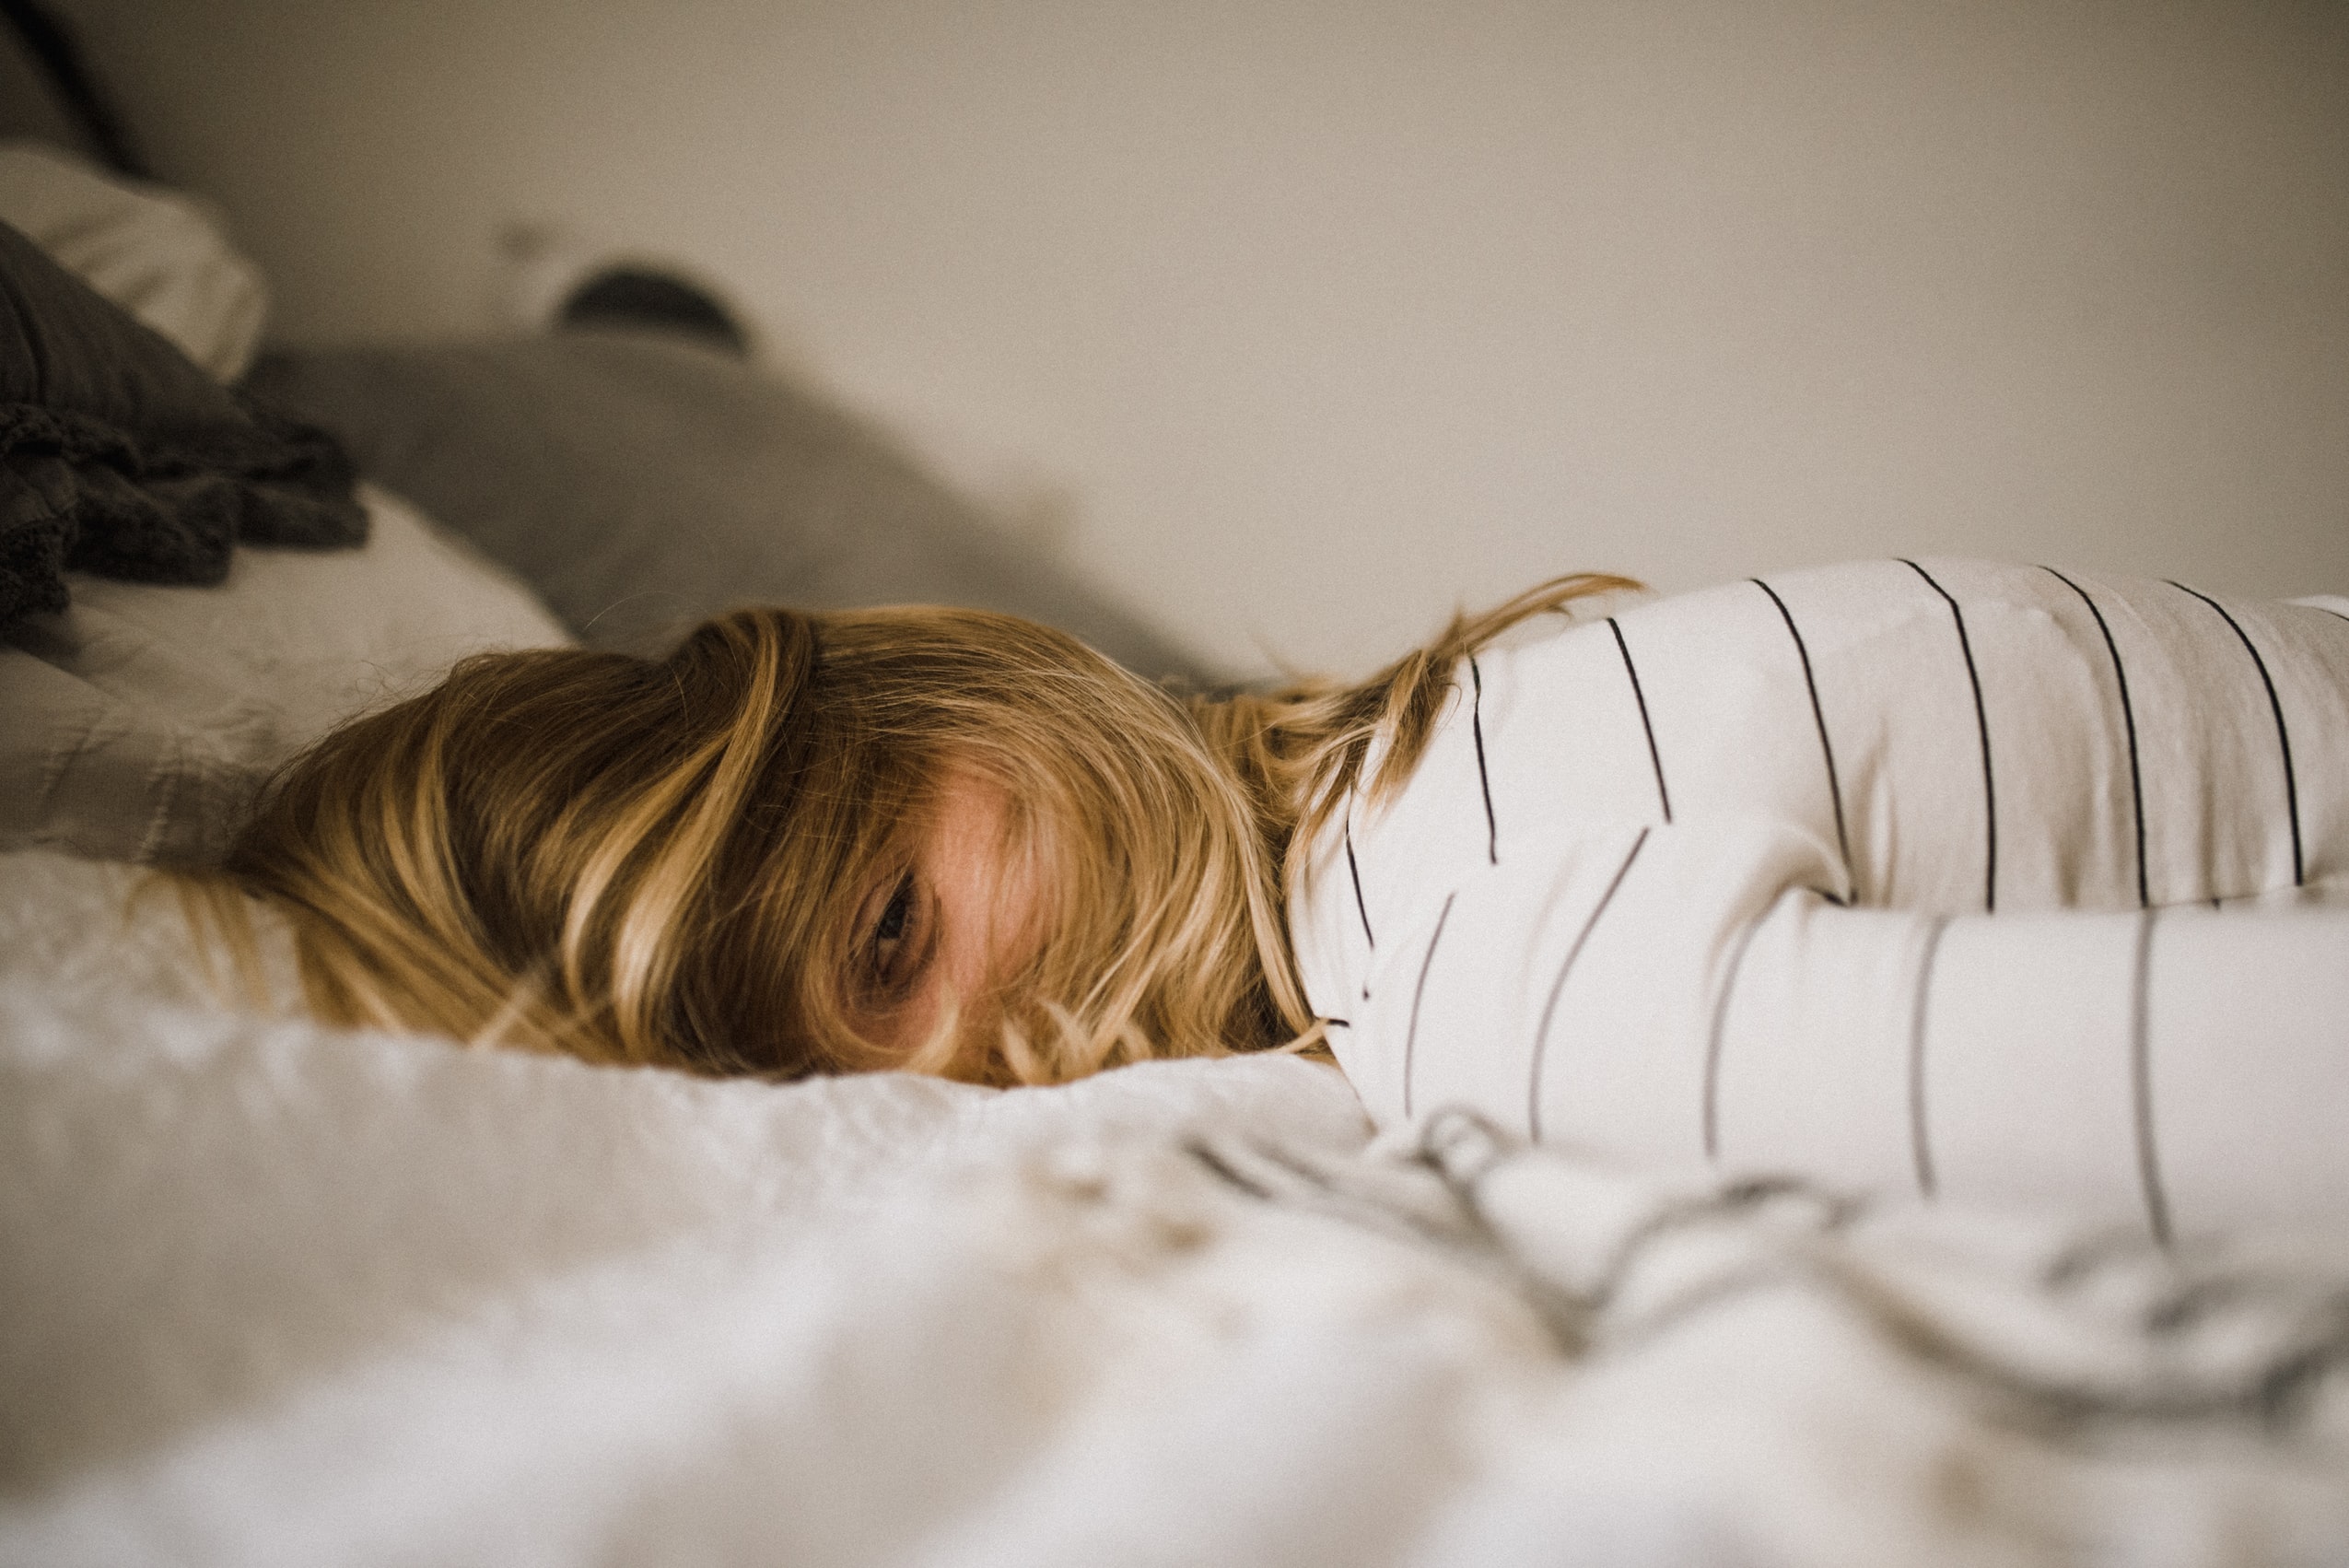 blonde woman in striped shirt lying face down with her hair covering her face